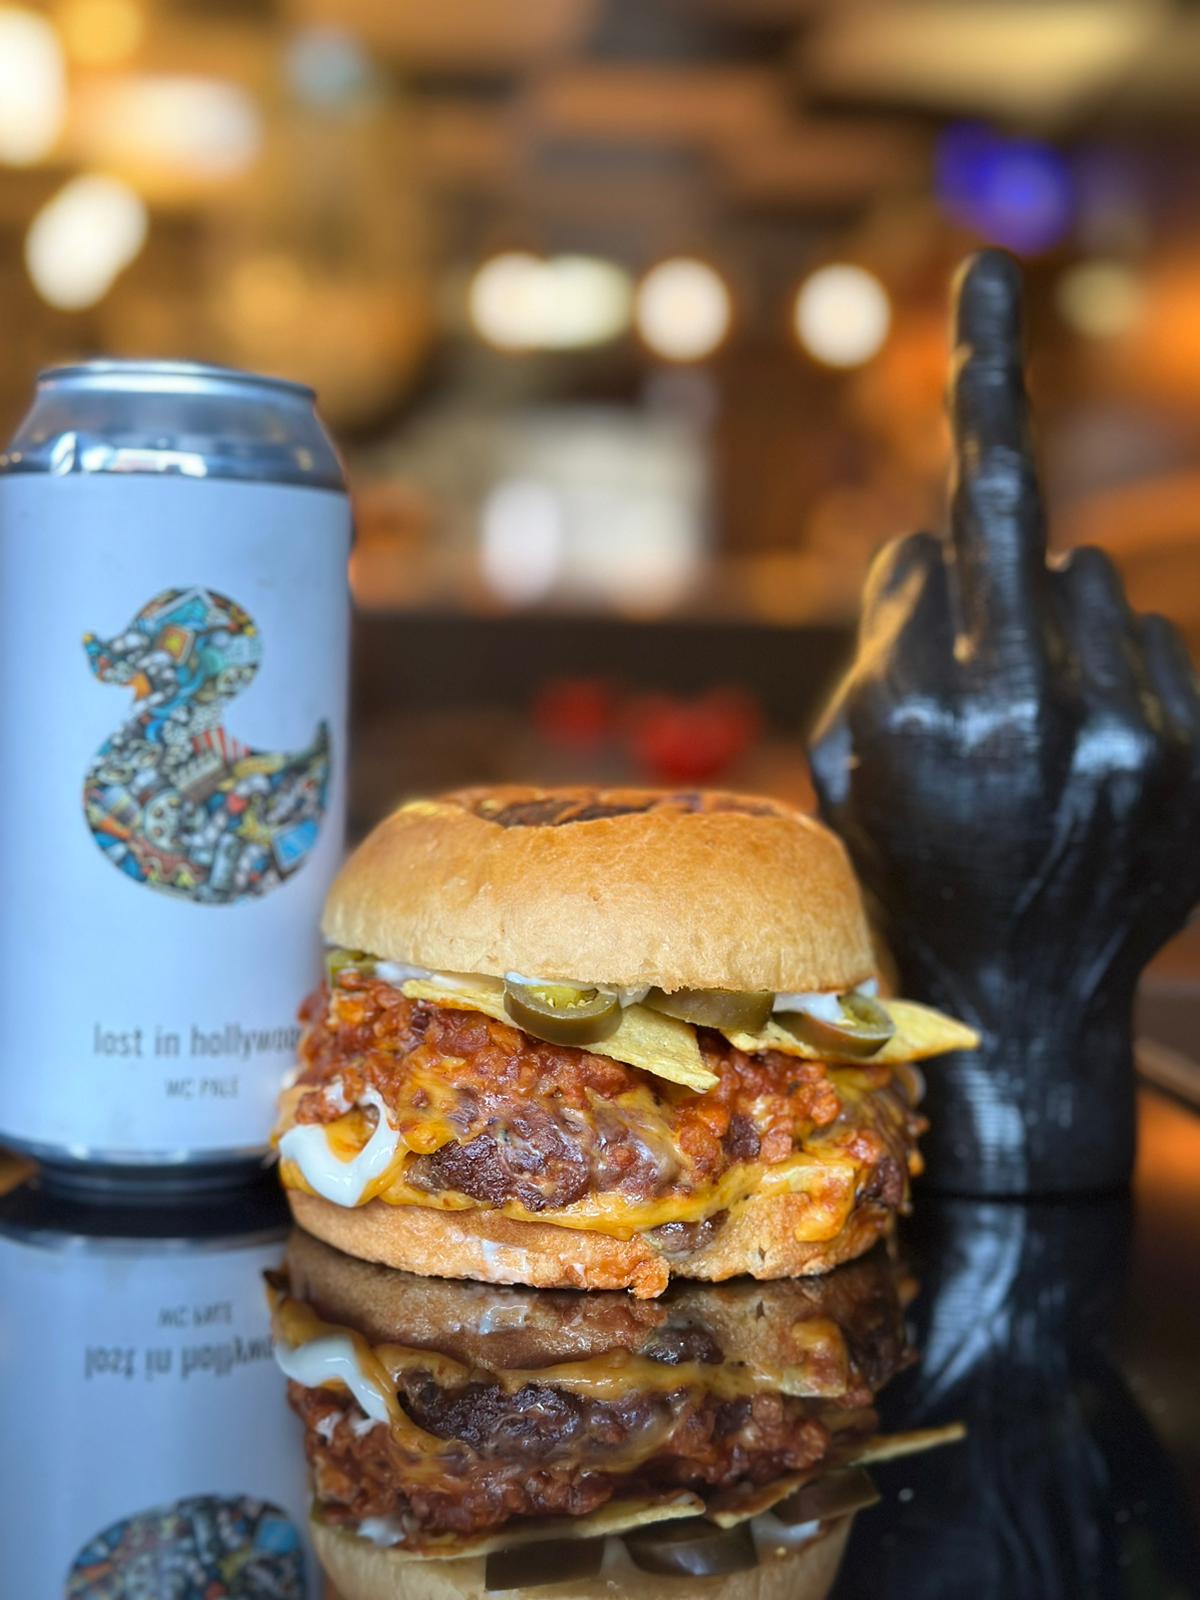 street food beefburger and can of craft beer/ale